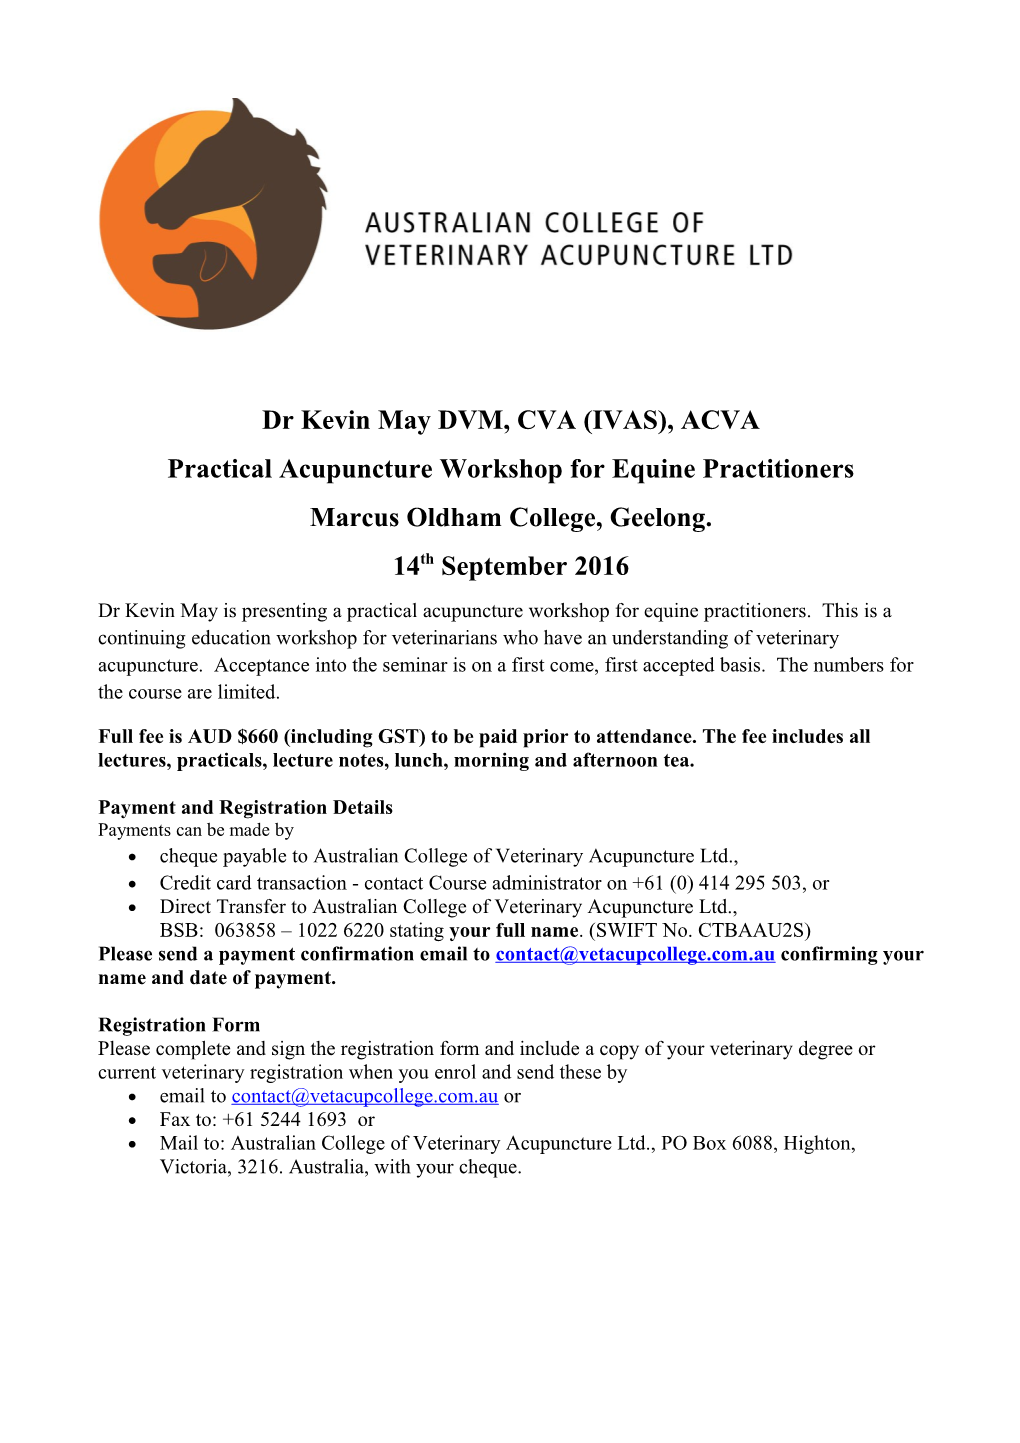 Practical Acupuncture Workshop for Equine Practitioners